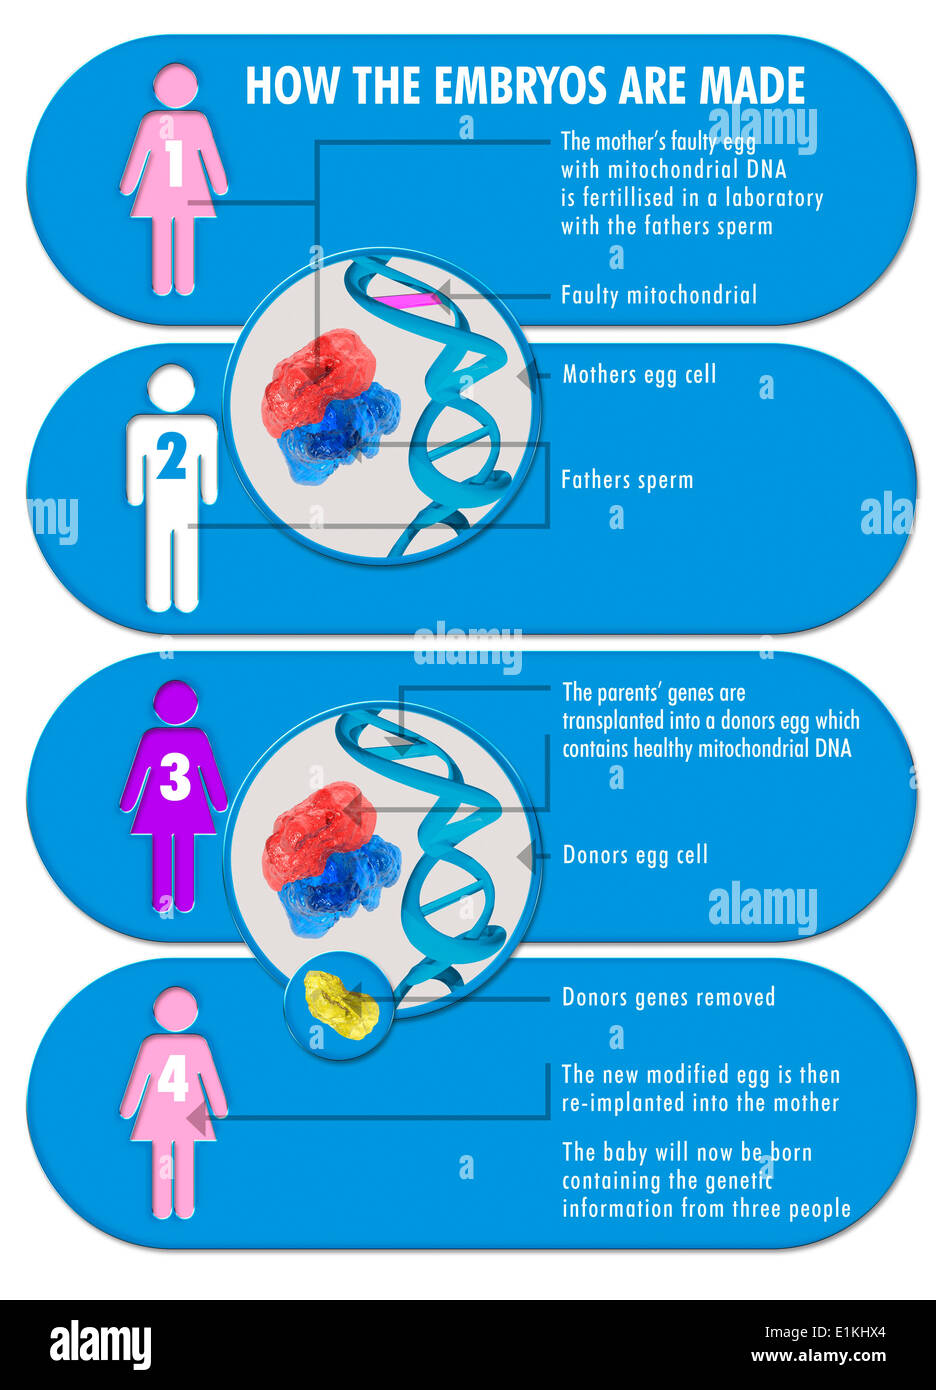 Infographic showing the process of three parent IVF (in vitro fertilisation) treatment. Stock Photo